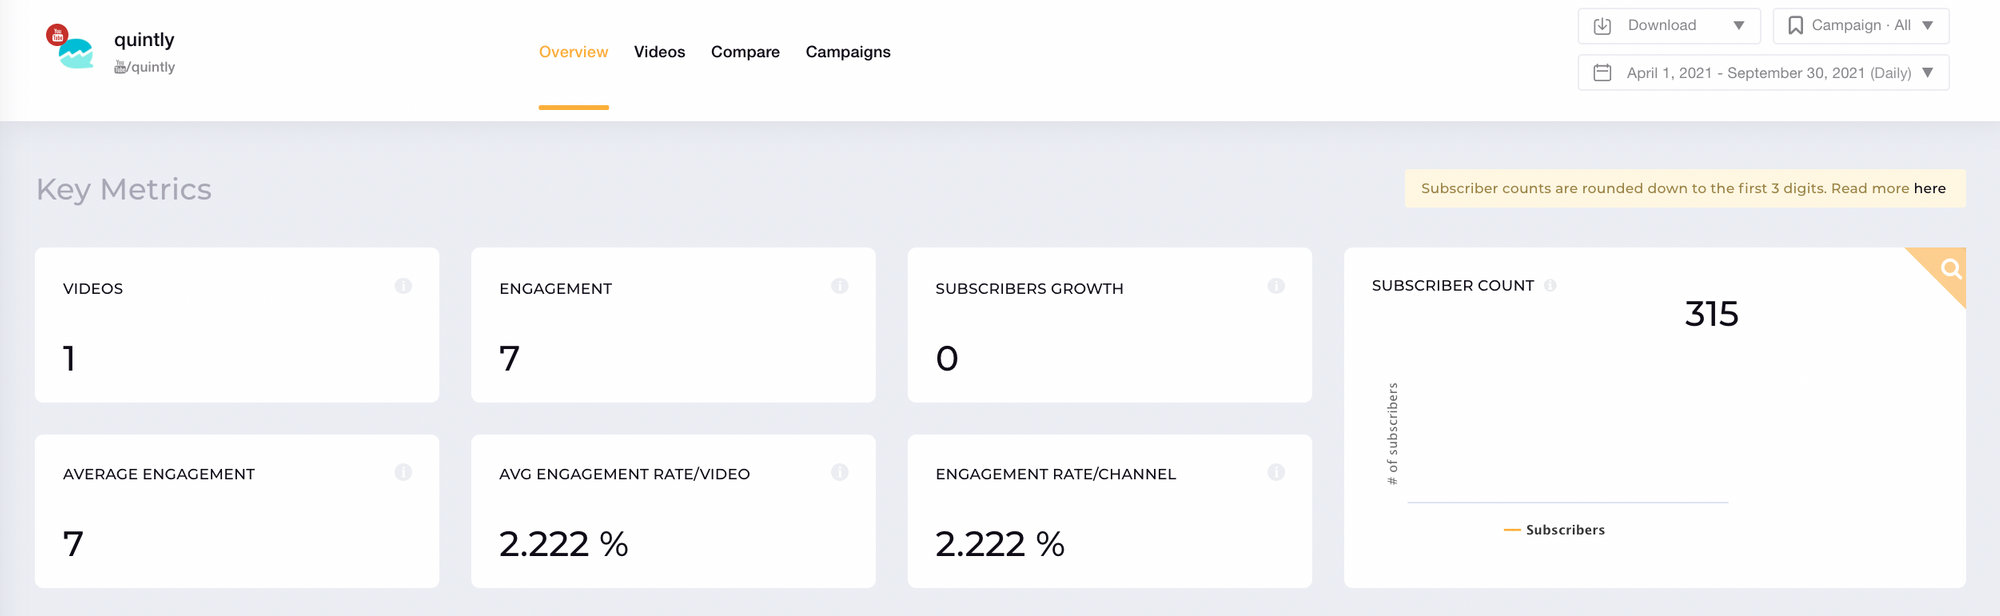 Here you can see how you can analyze your YouTube competitor's performance by using Socialinsider.